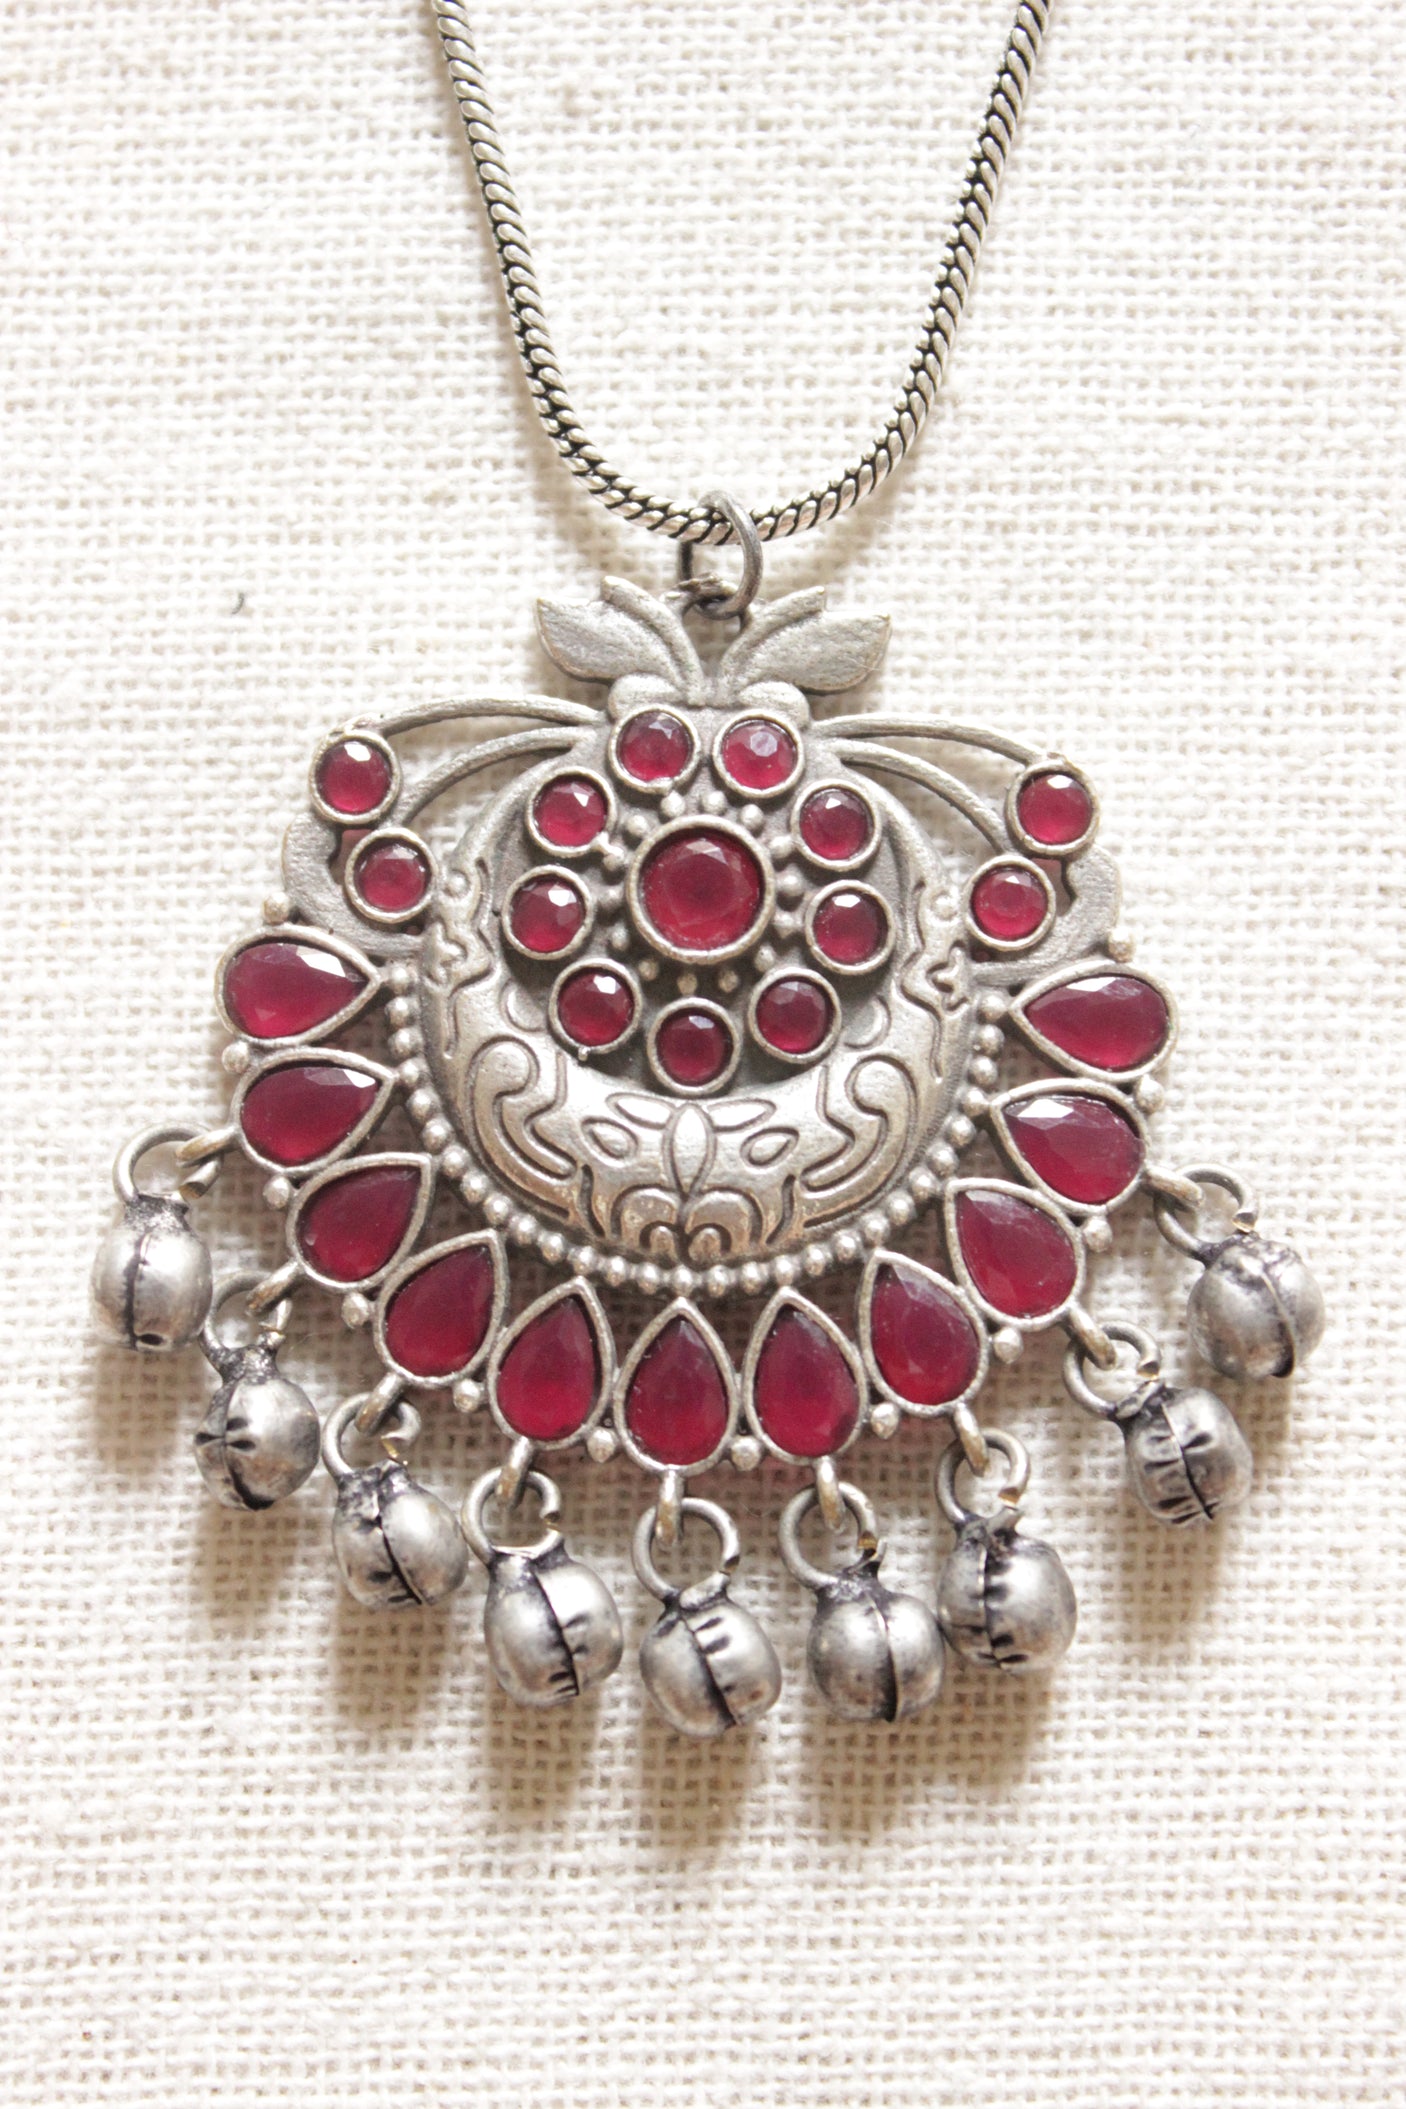 Ruby Red Stones Embedded and Ghungroo Beads Petite Silver Chain Oxidised Finish Necklace